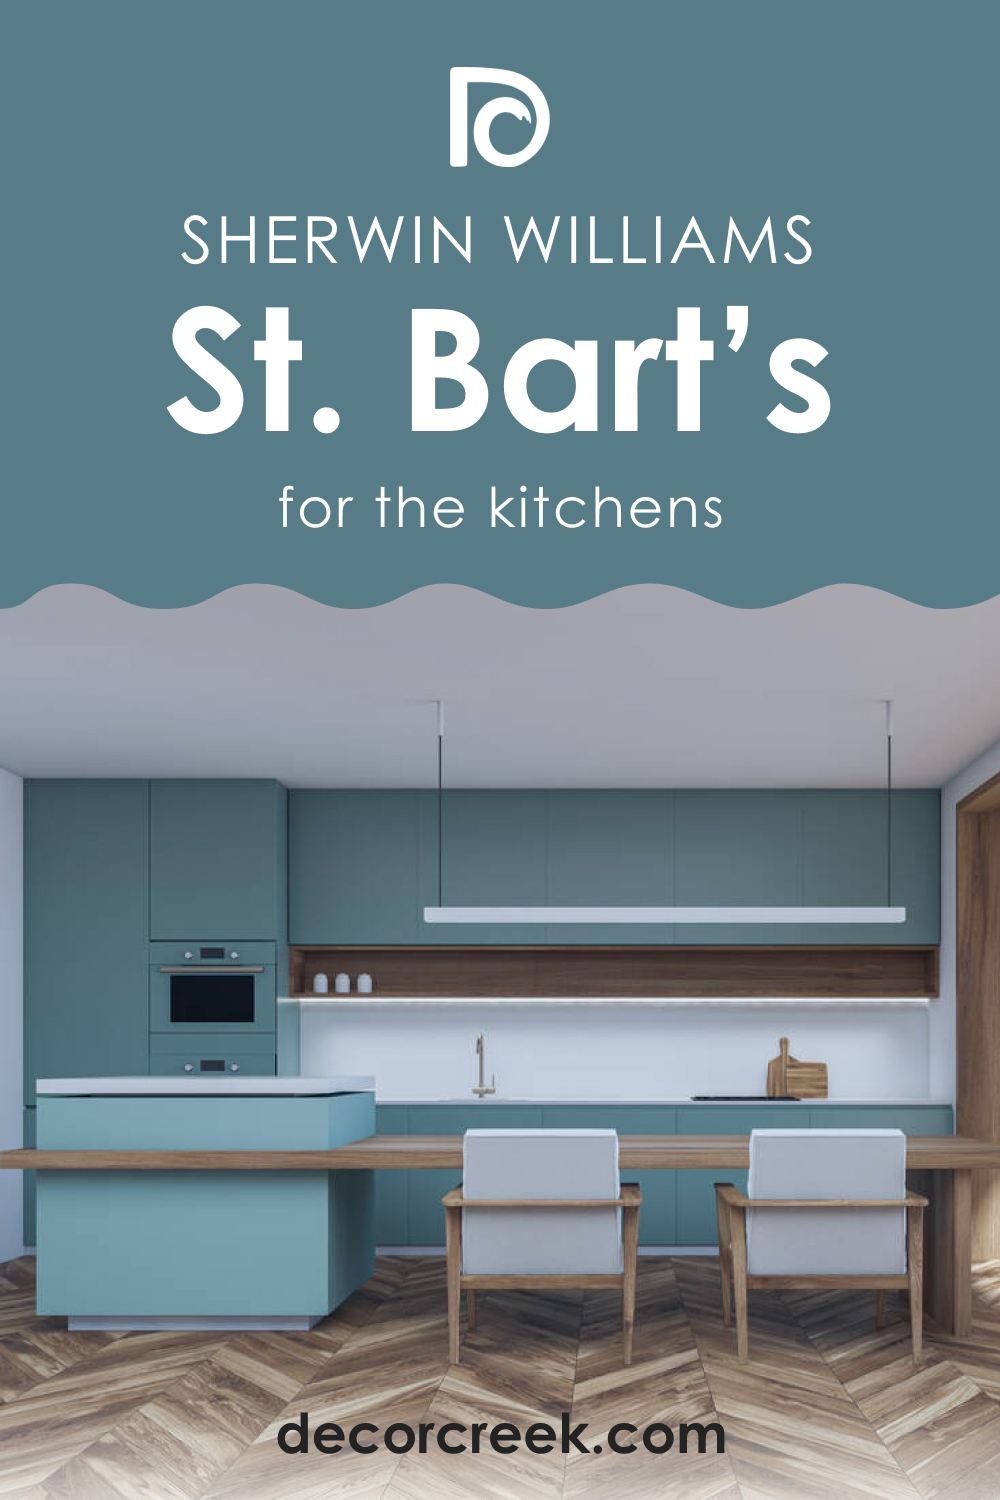 How to Use SW 7614 St. Bart’s for the Kitchen?